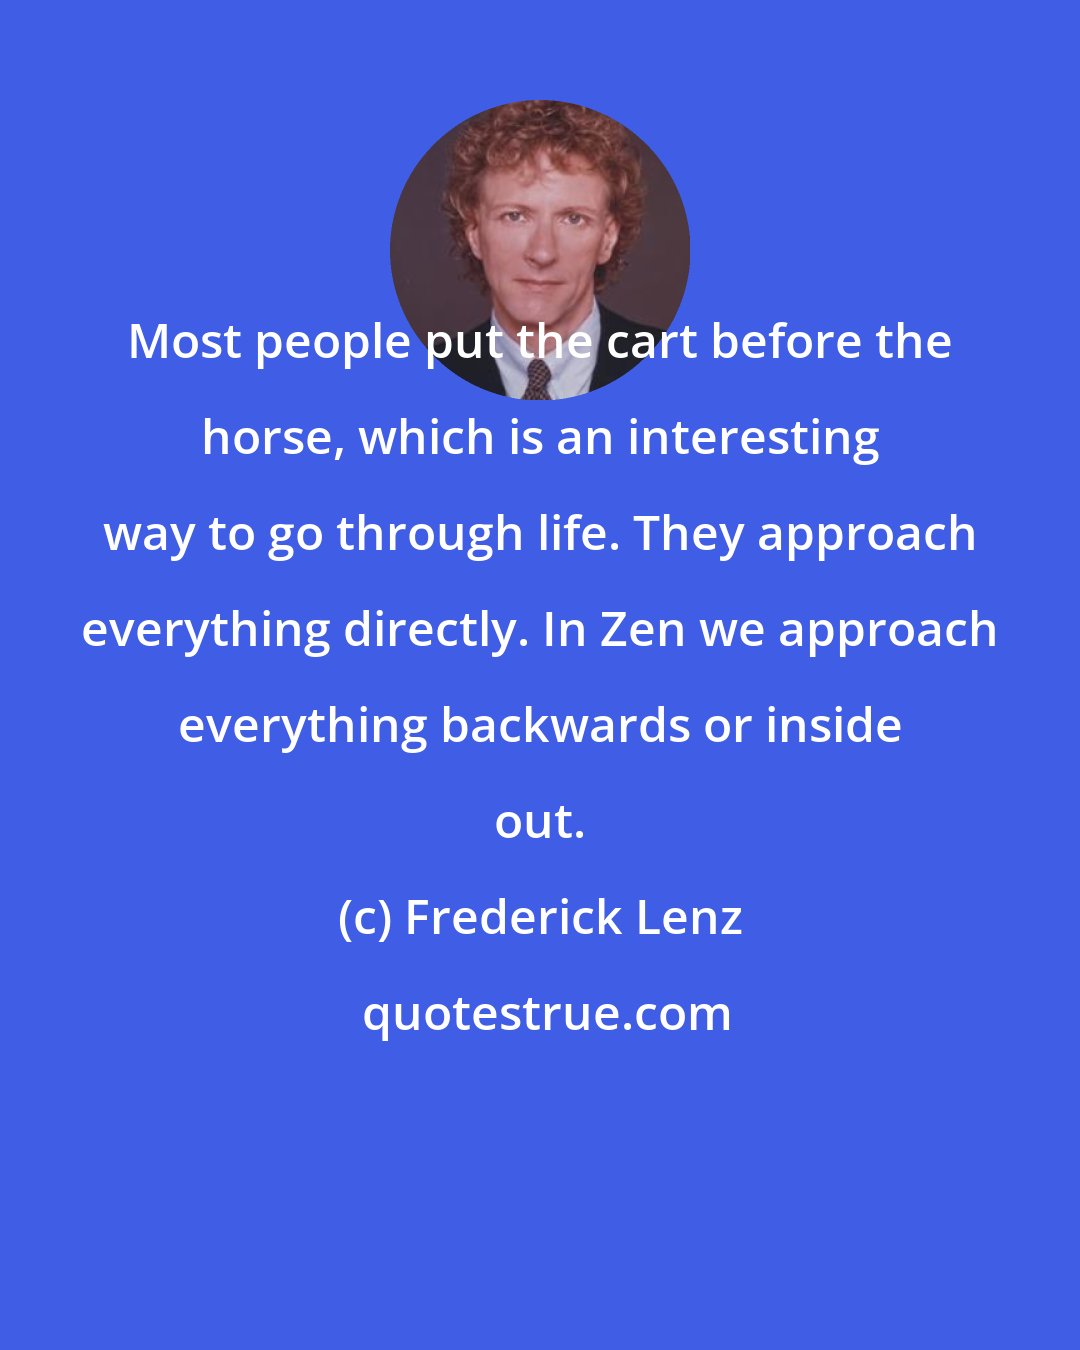 Frederick Lenz: Most people put the cart before the horse, which is an interesting way to go through life. They approach everything directly. In Zen we approach everything backwards or inside out.